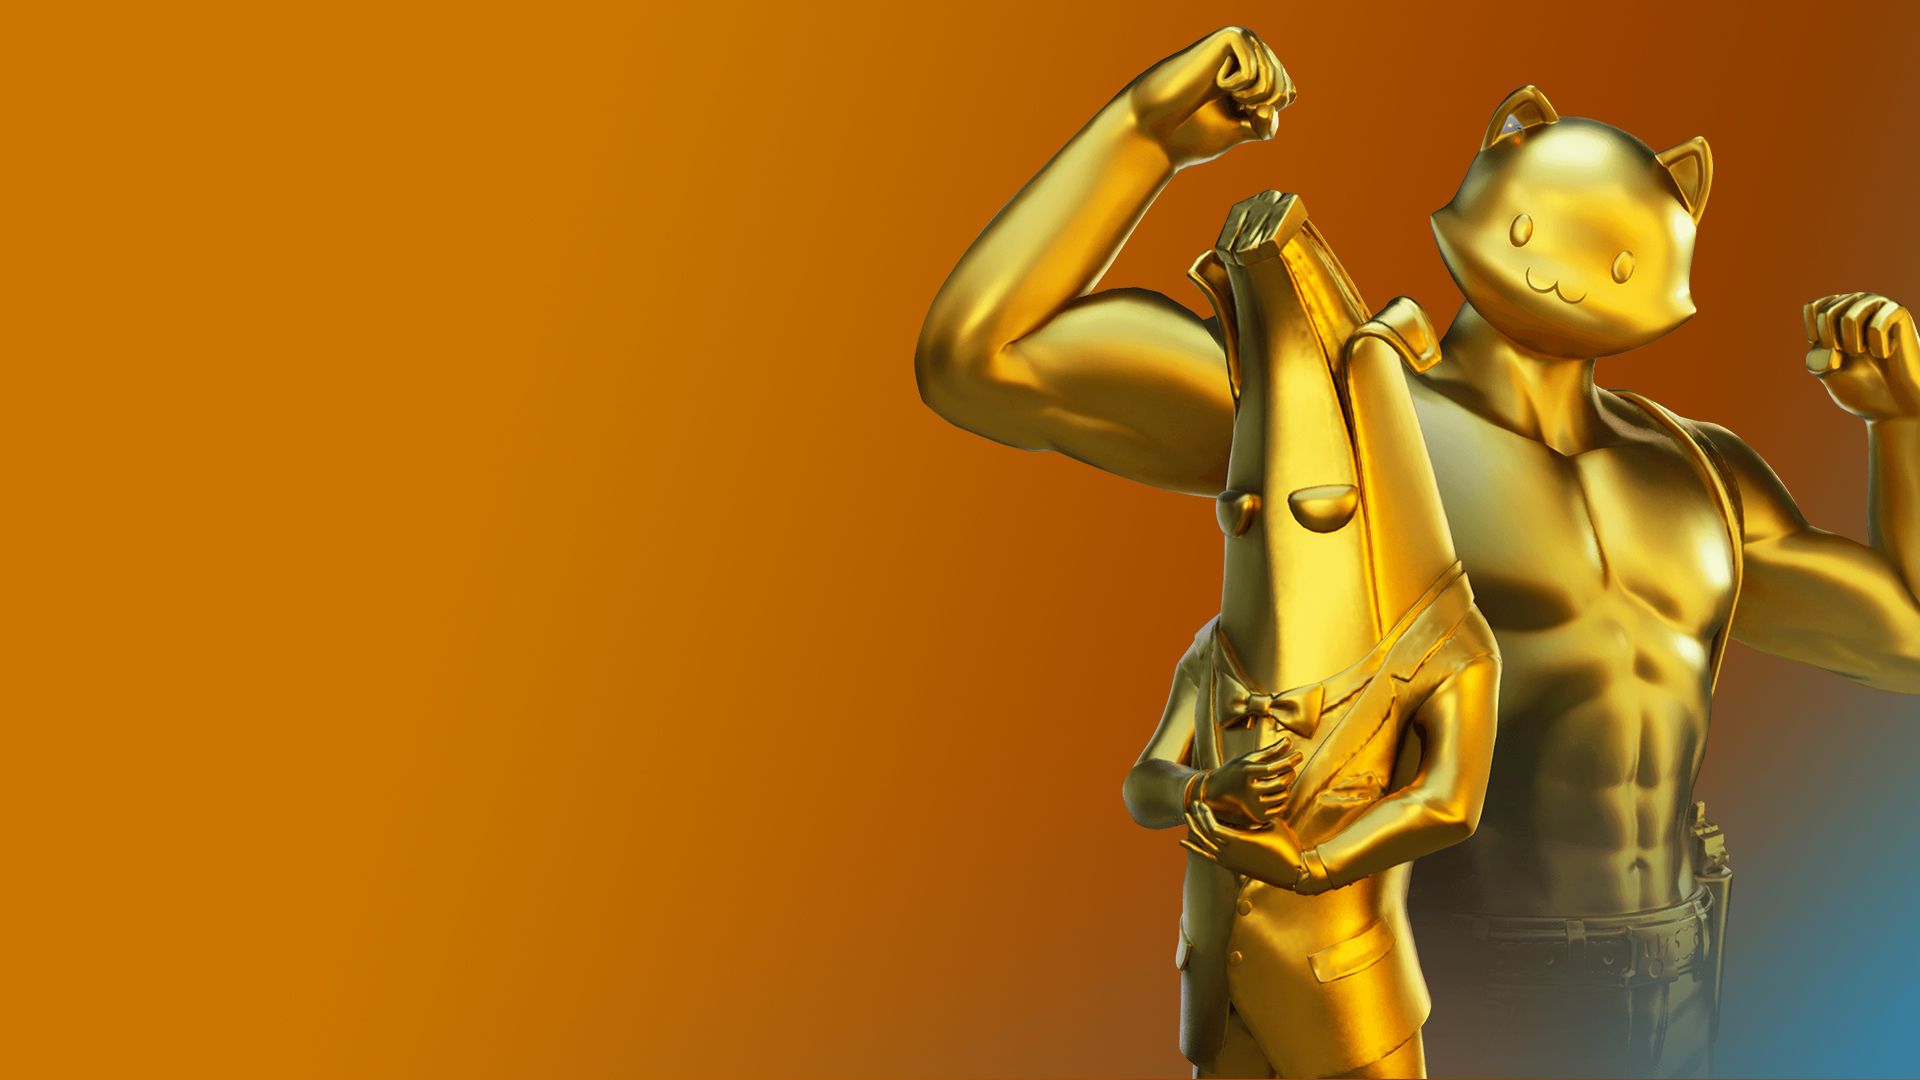 Gold Agent Peely and Meowscles Fortnite Season 12 Skin iPhone 6s, 6 Plus and Pixel XL , One Plus 3t, 5 Wallpaper, HD Games 4K Wallpaper, Image, Photo and Background